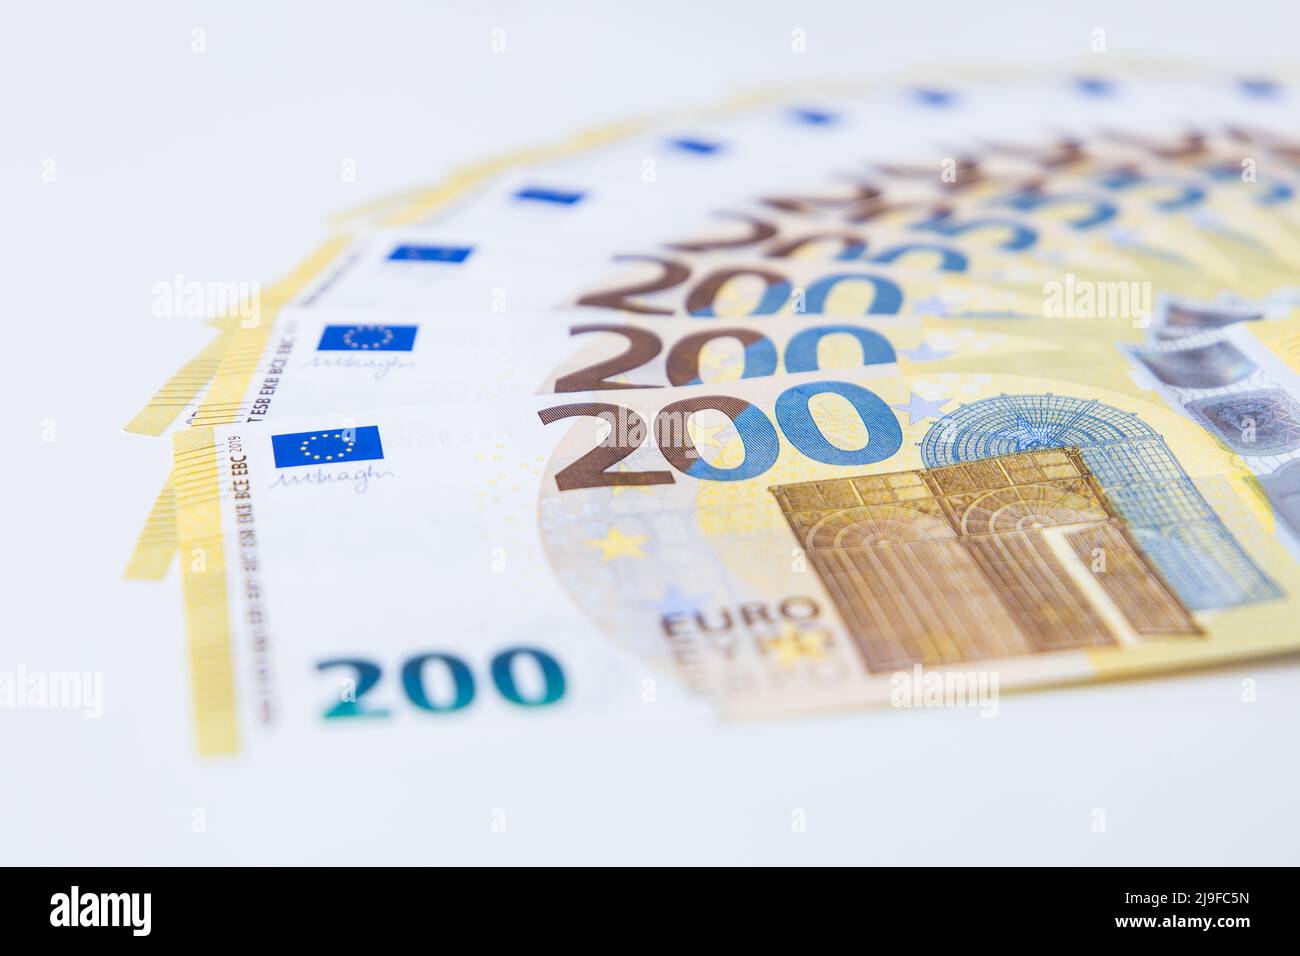 A load of 200 Euro banknotes in a pattern Stock Photo